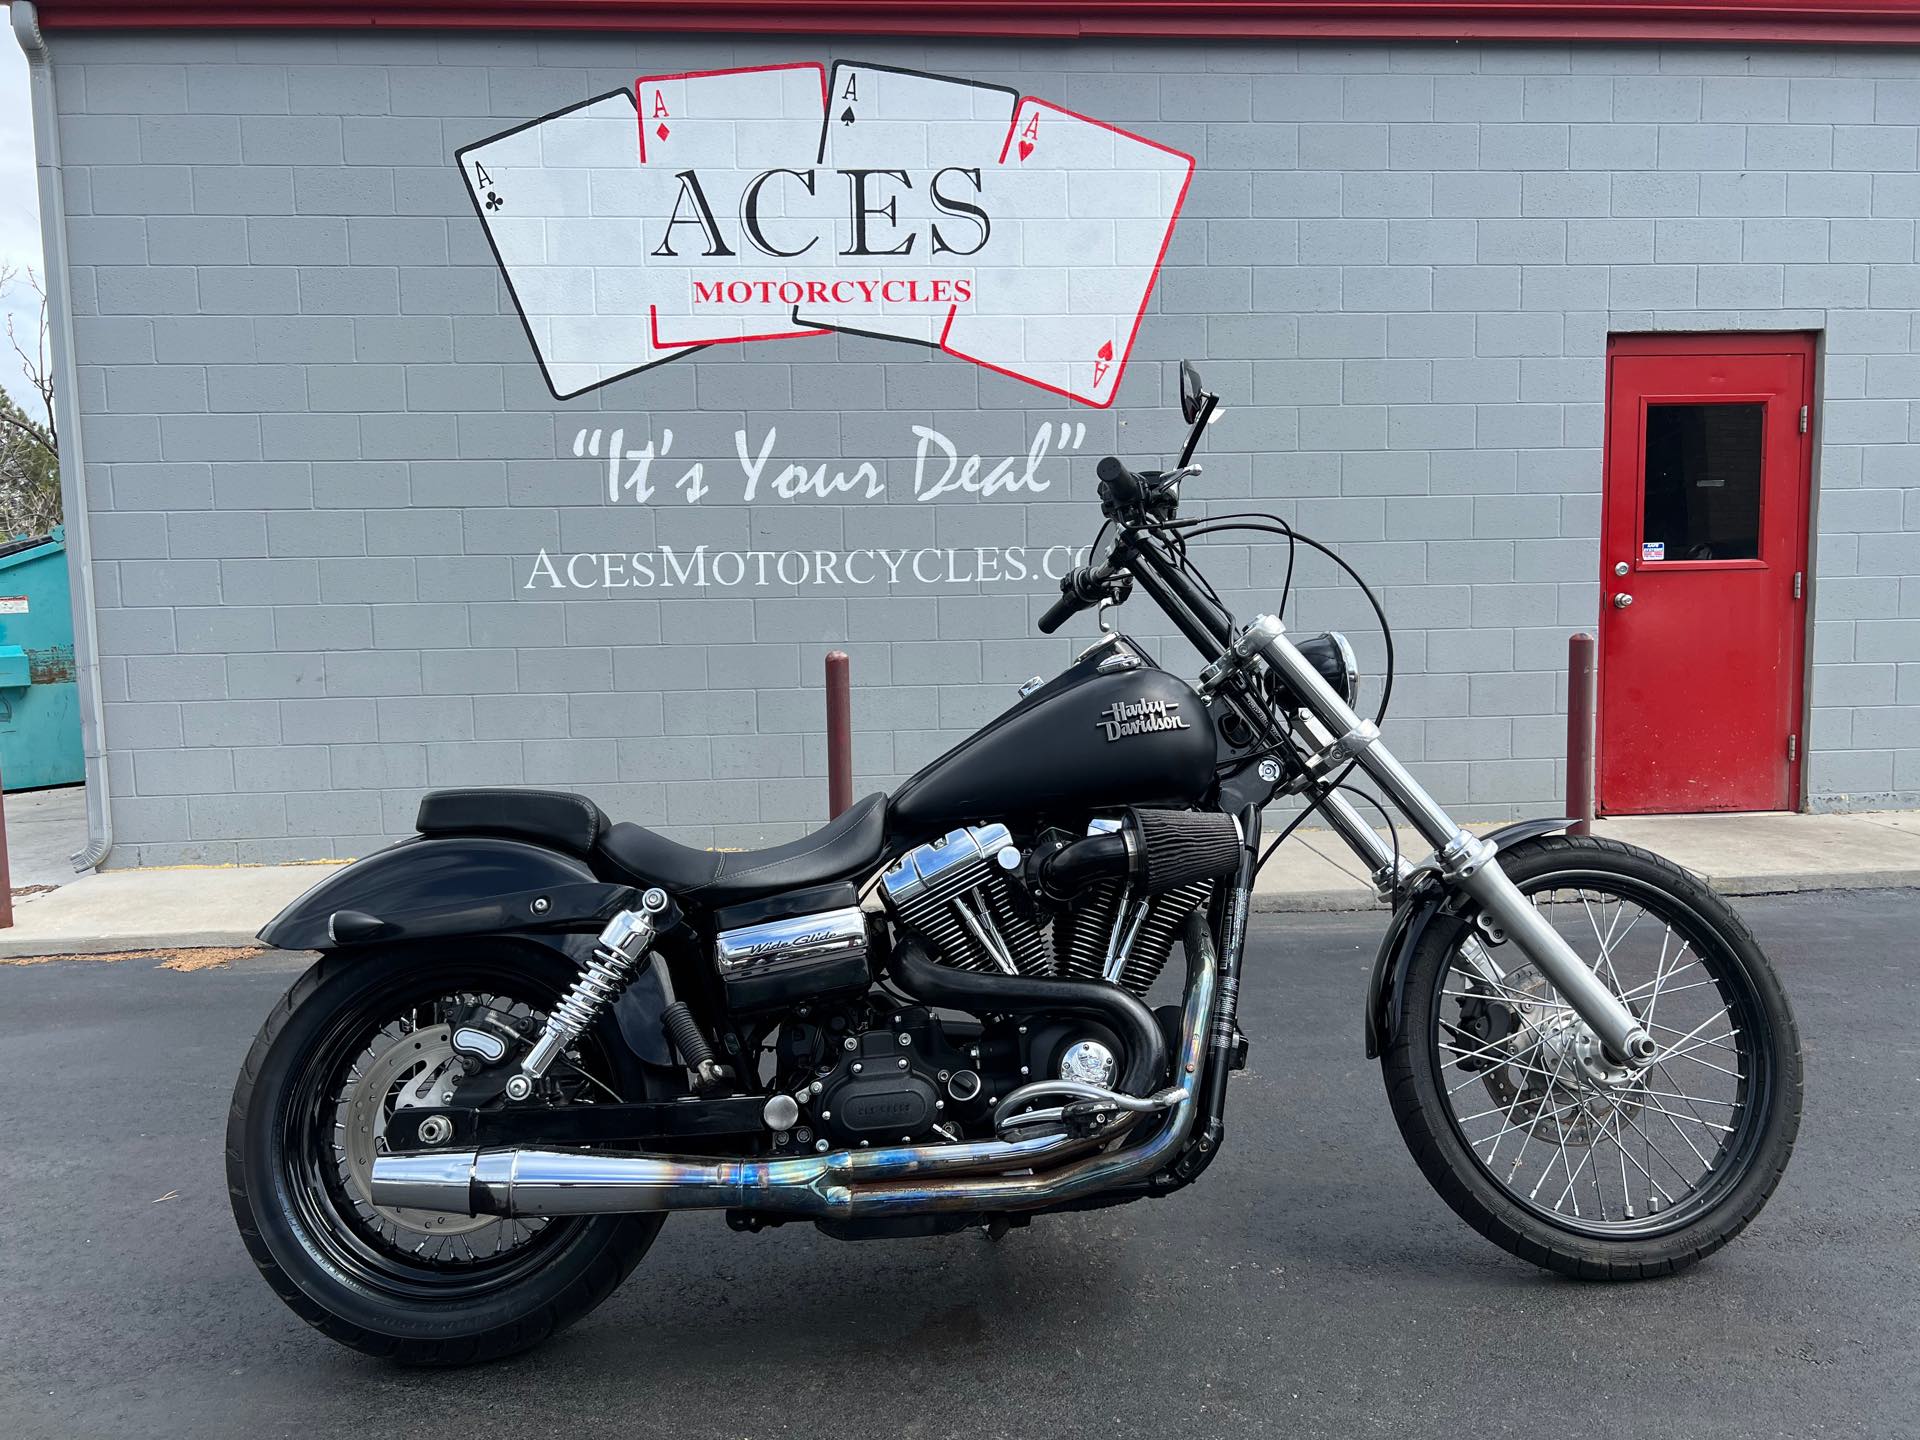 2012 Harley-Davidson Dyna Glide Wide Glide at Aces Motorcycles - Fort Collins